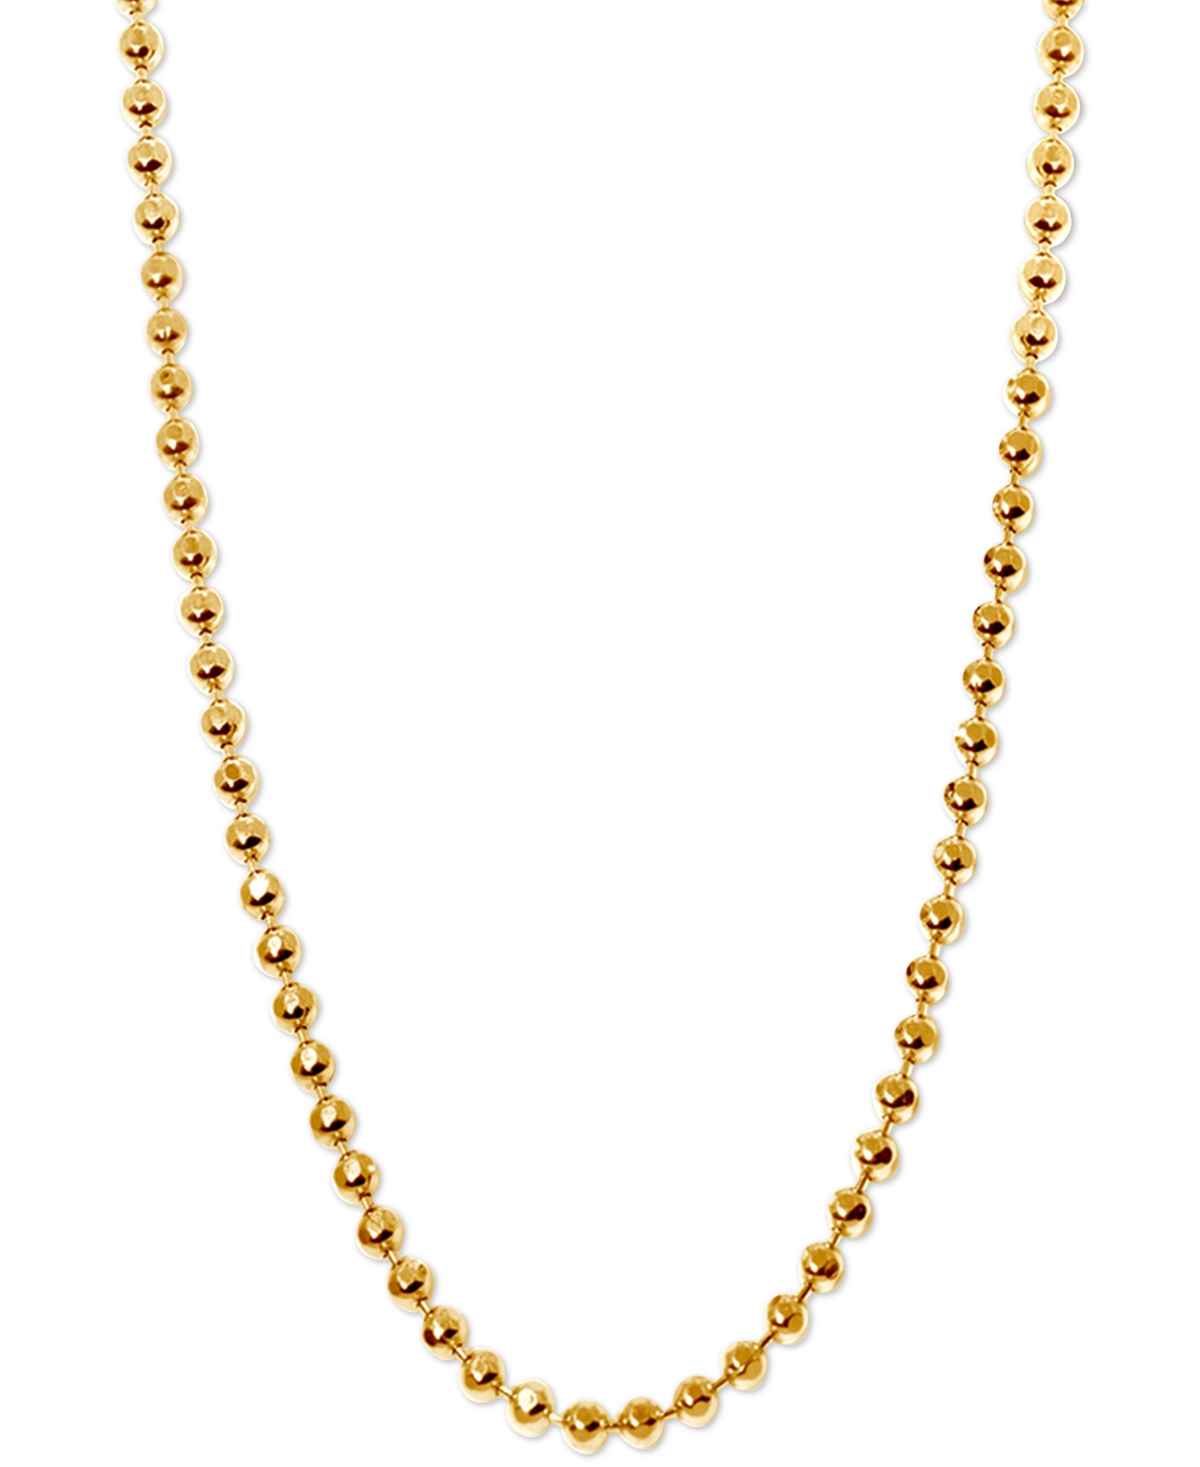 Alex Woo 20" Ball Chain Necklace in 14k Gold